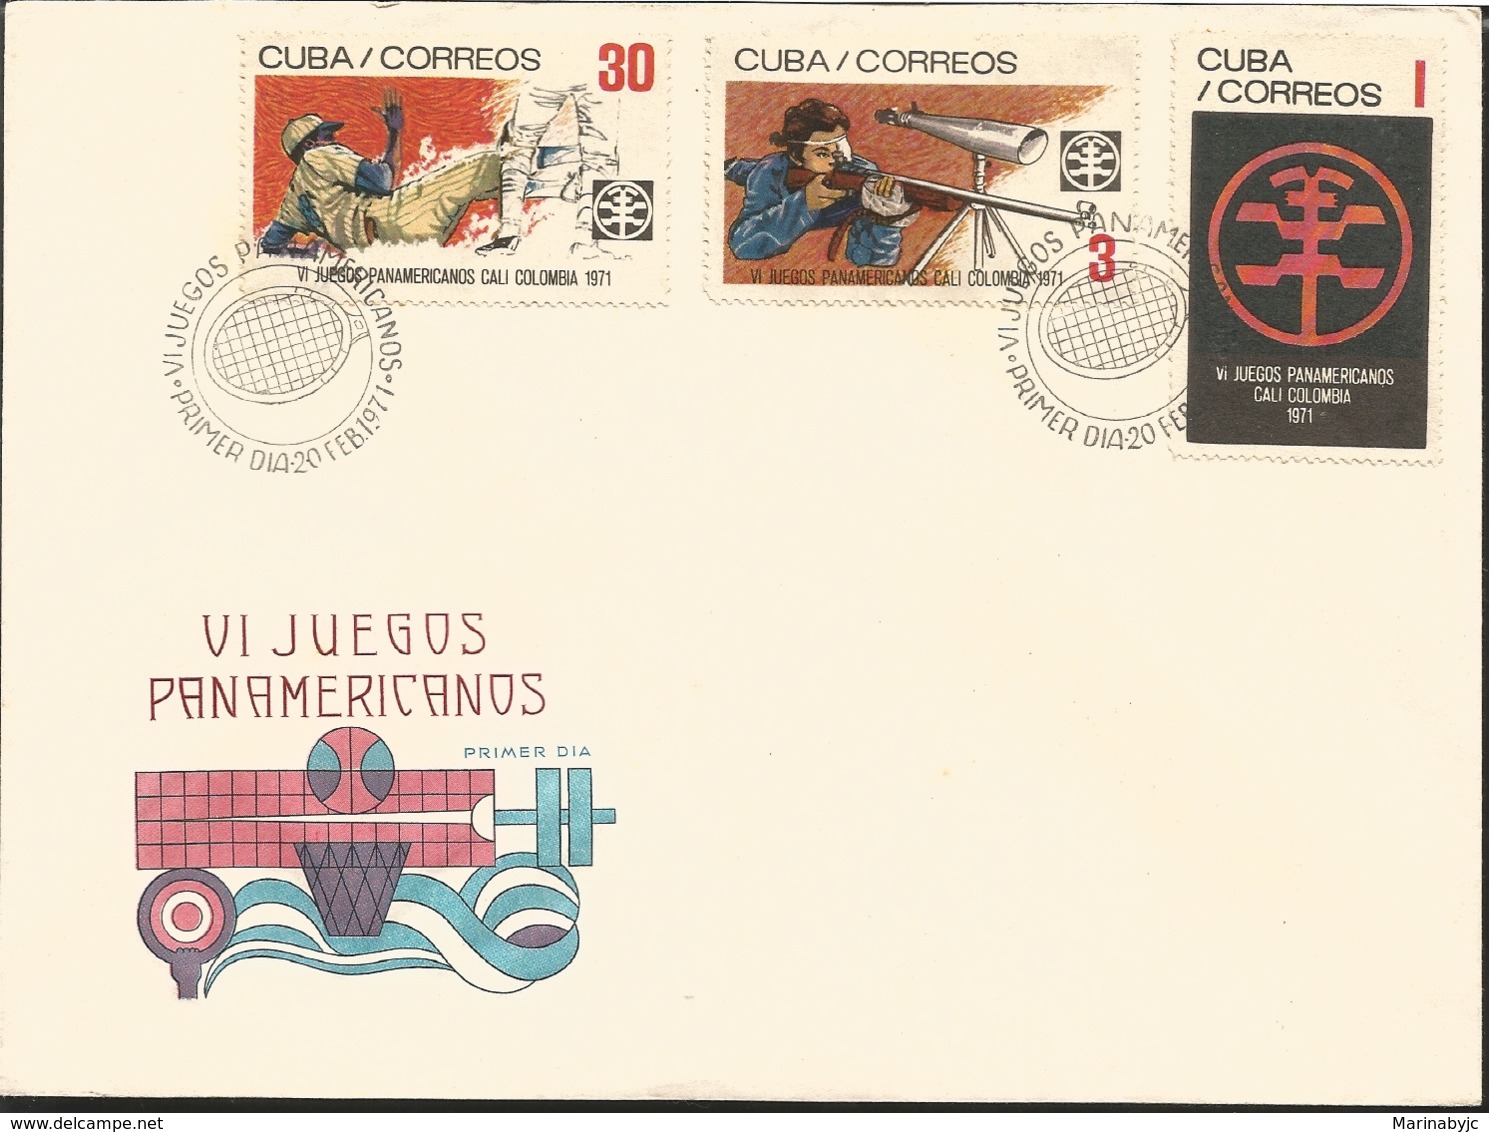 V) 1971 CARIBBEAN, 6TH PAN AMERICAN GAMES, CALI, COLOMBIA, BASEBALL, RIFLE SHOOTING, EMBLEM, WITH SLOGAN CANCELATION IN - Lettres & Documents